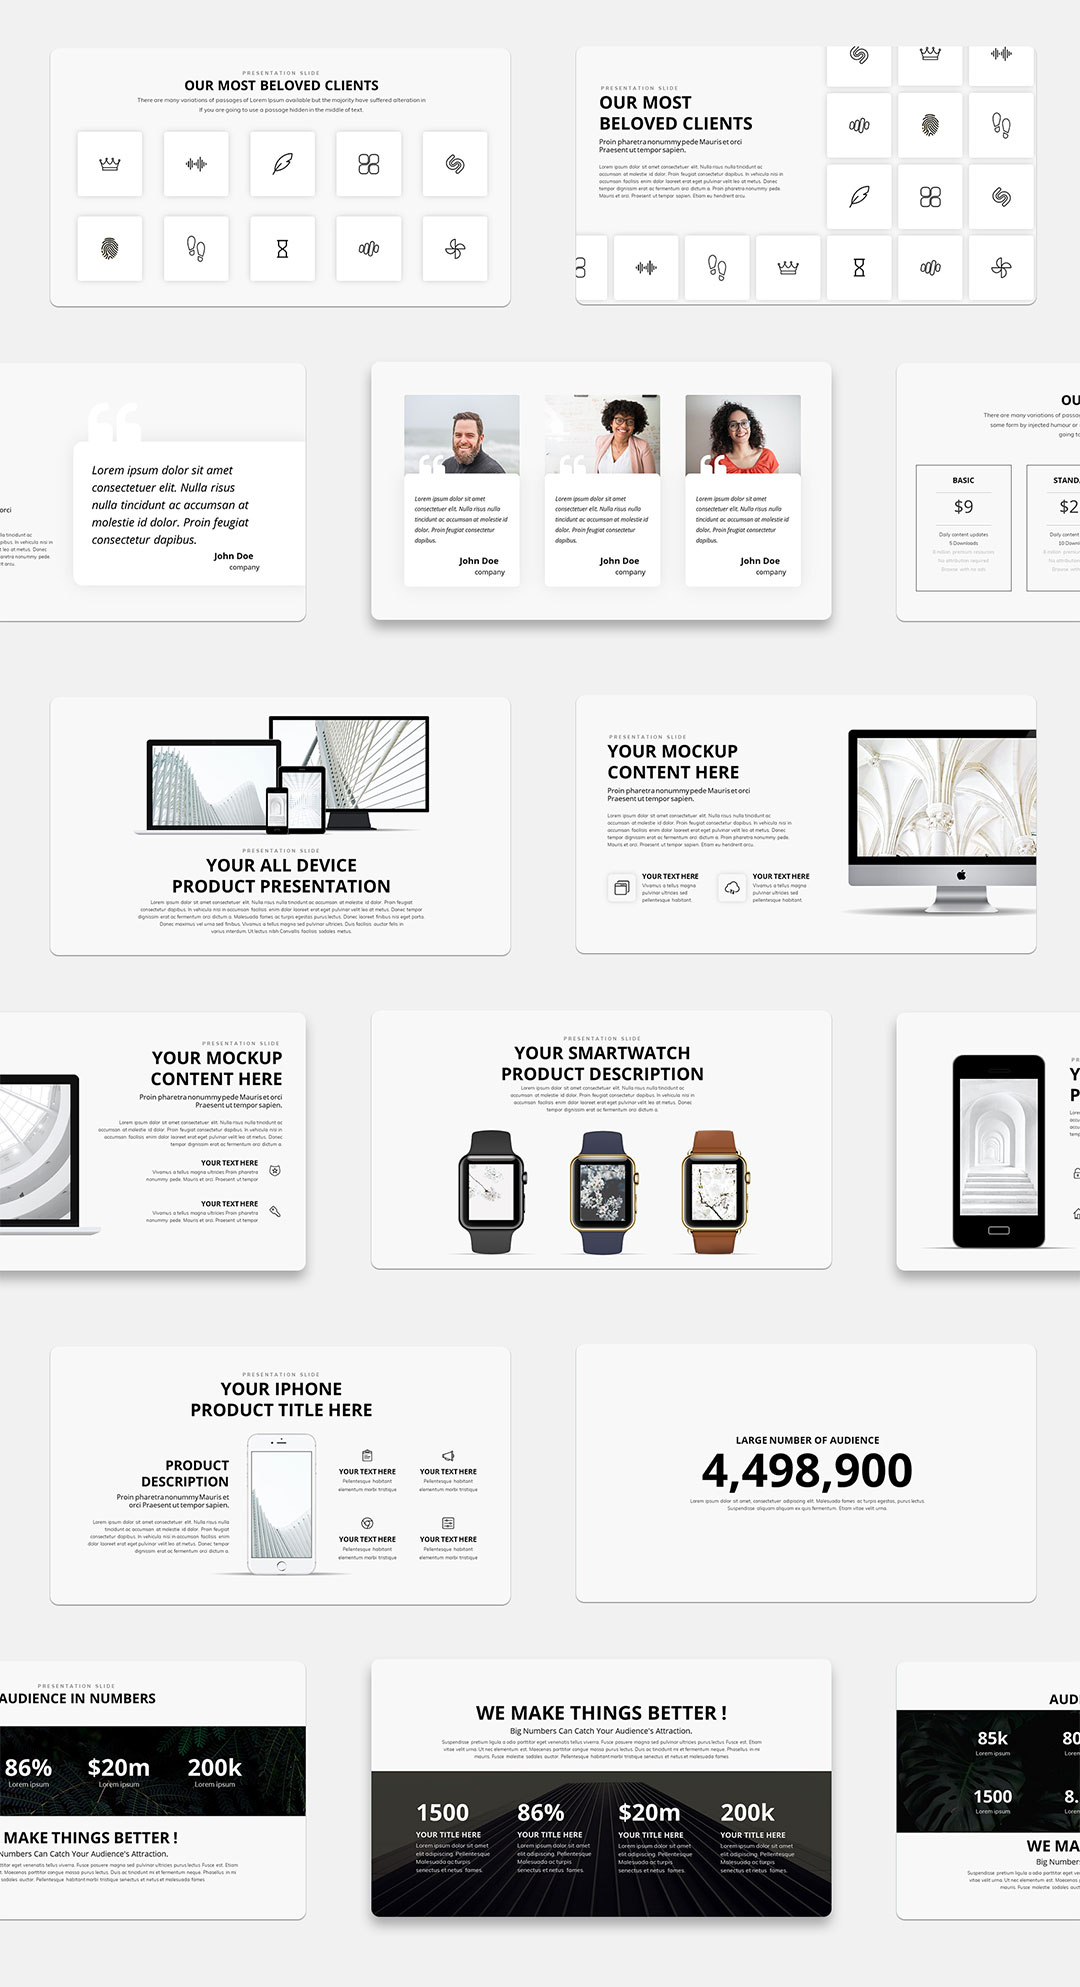 Free The Triumph World - Minimal PowerPoint Template